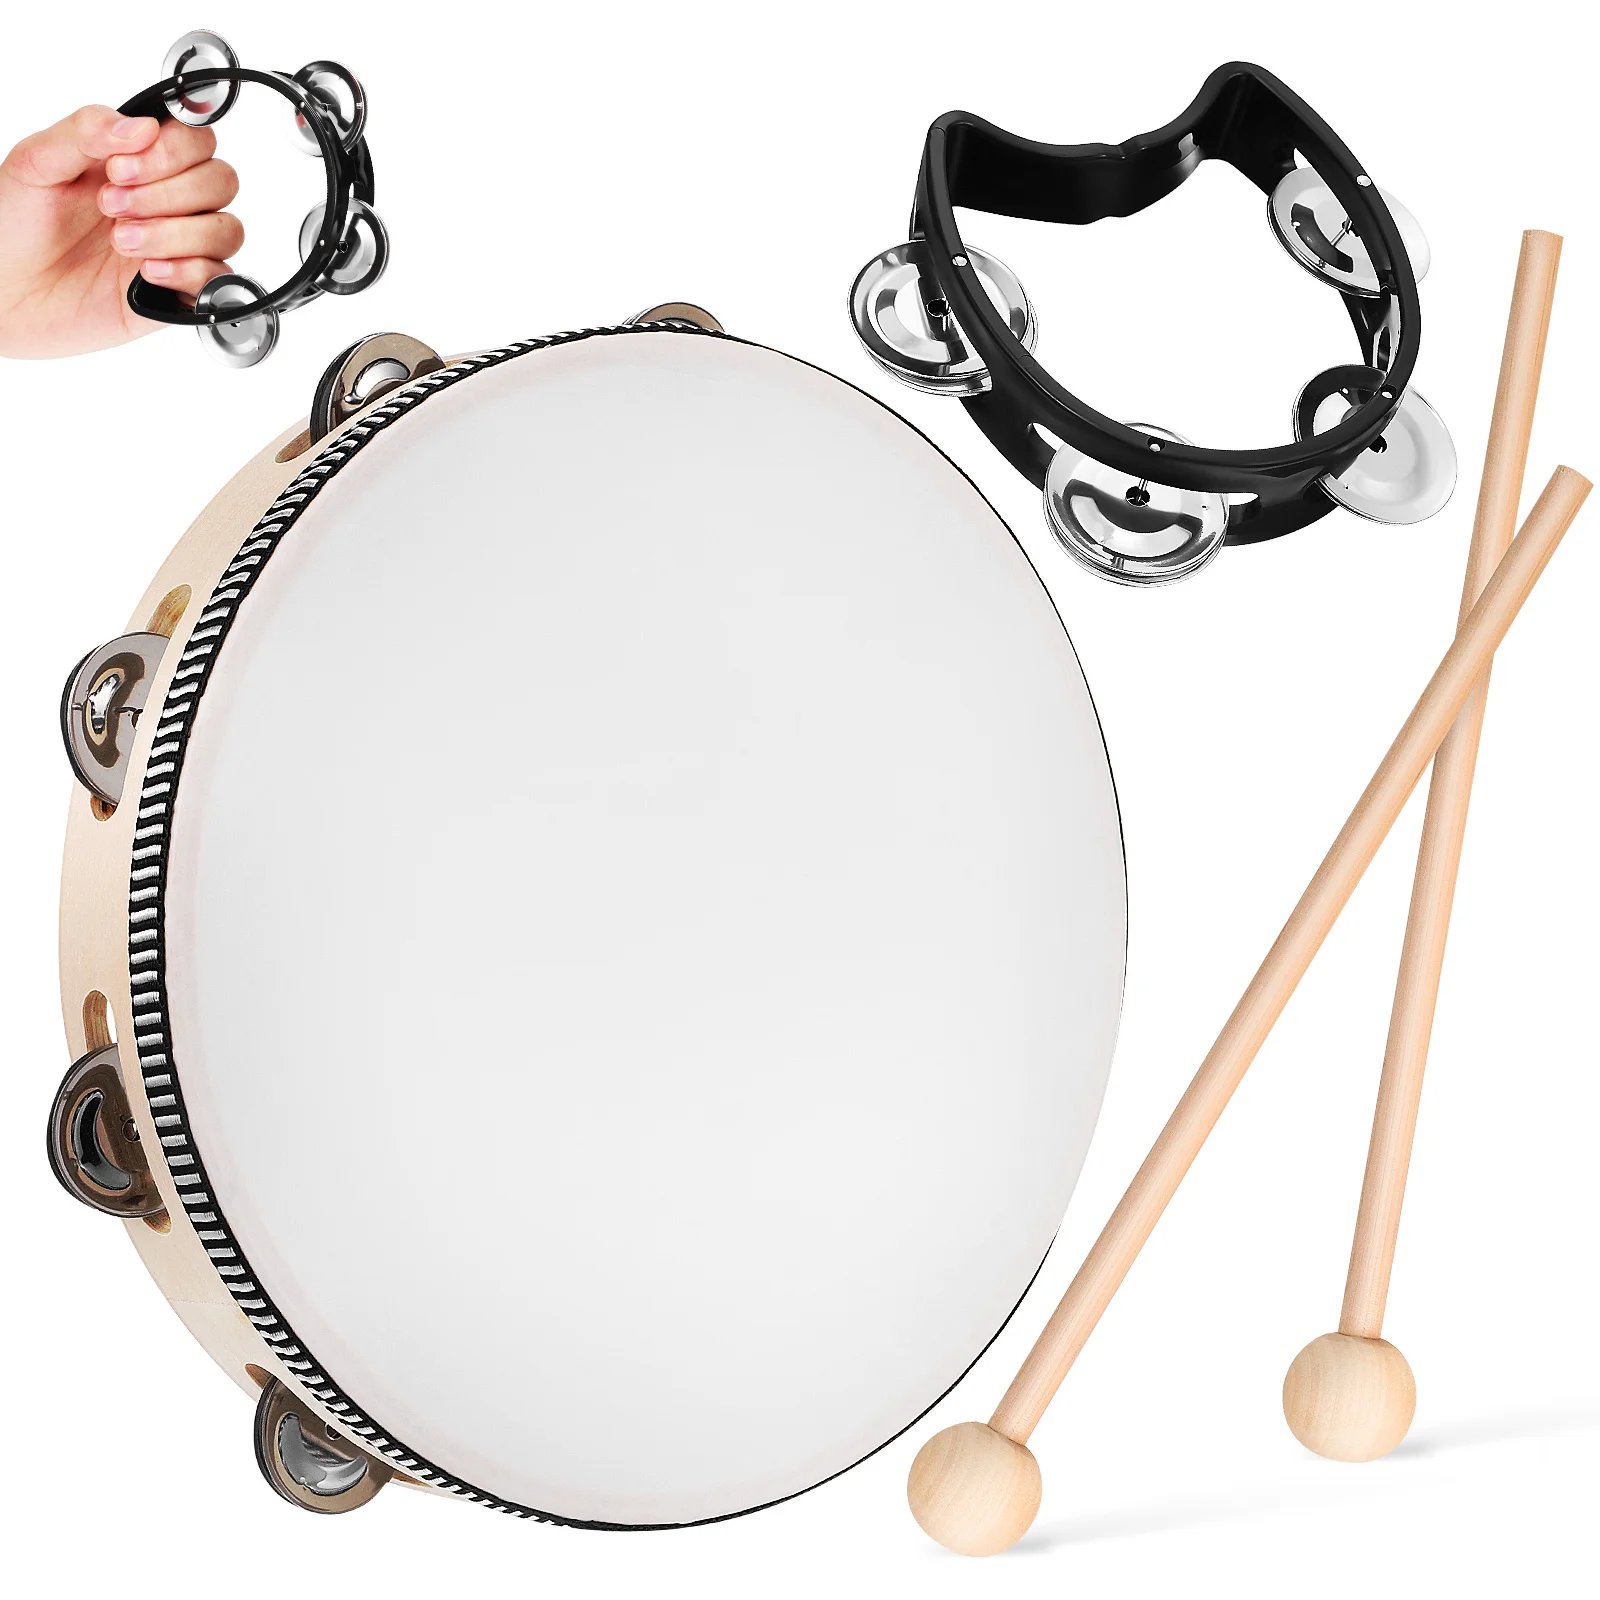 

Percussion Tambourine For Adultss Wood Tambourines Adults Handheld Drum Jingle Bells Set Church Tambourines Musical Percussion